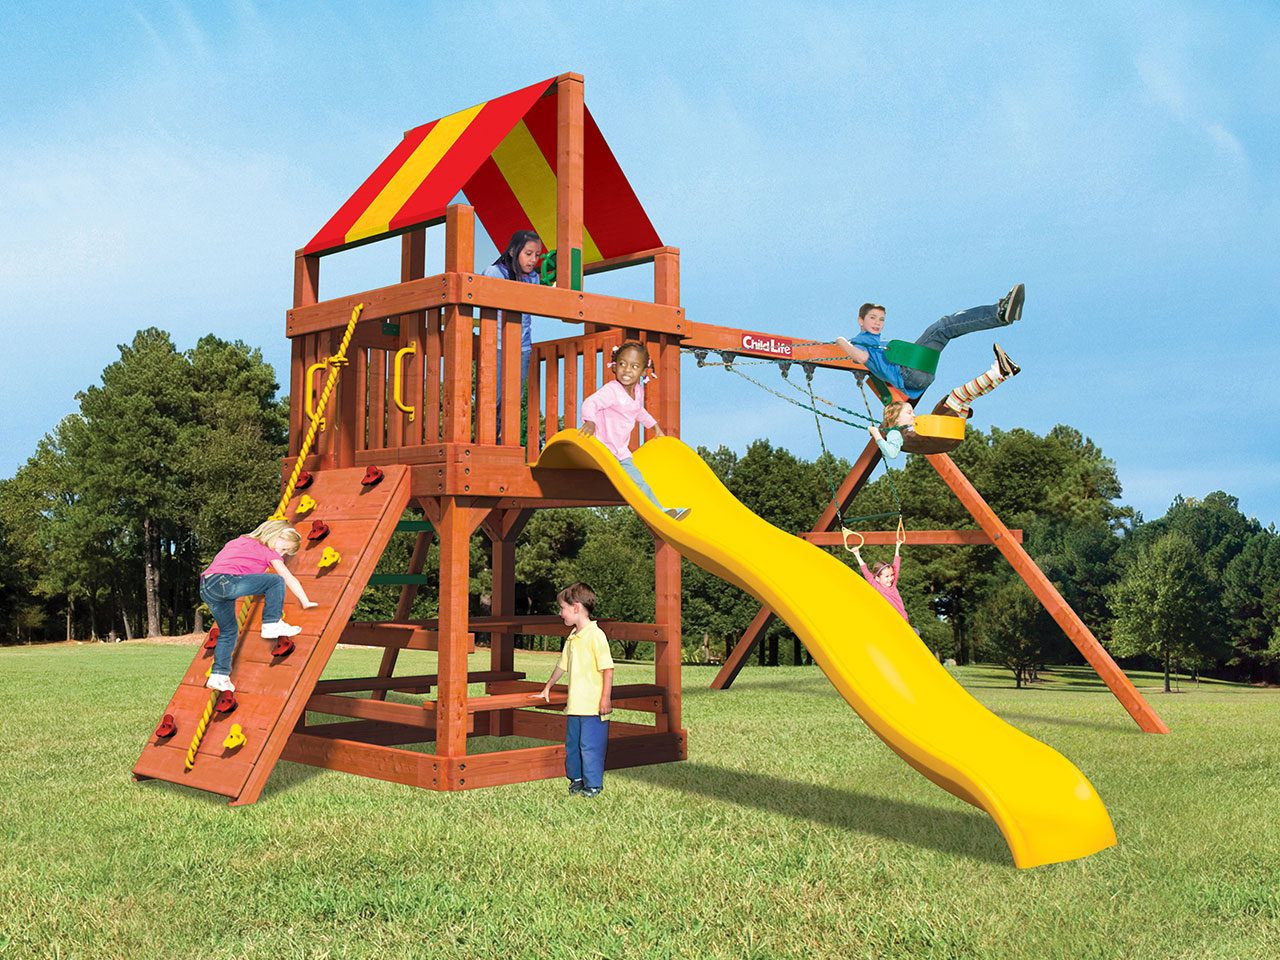 children playing on a gym playset in a yard with trees in the background